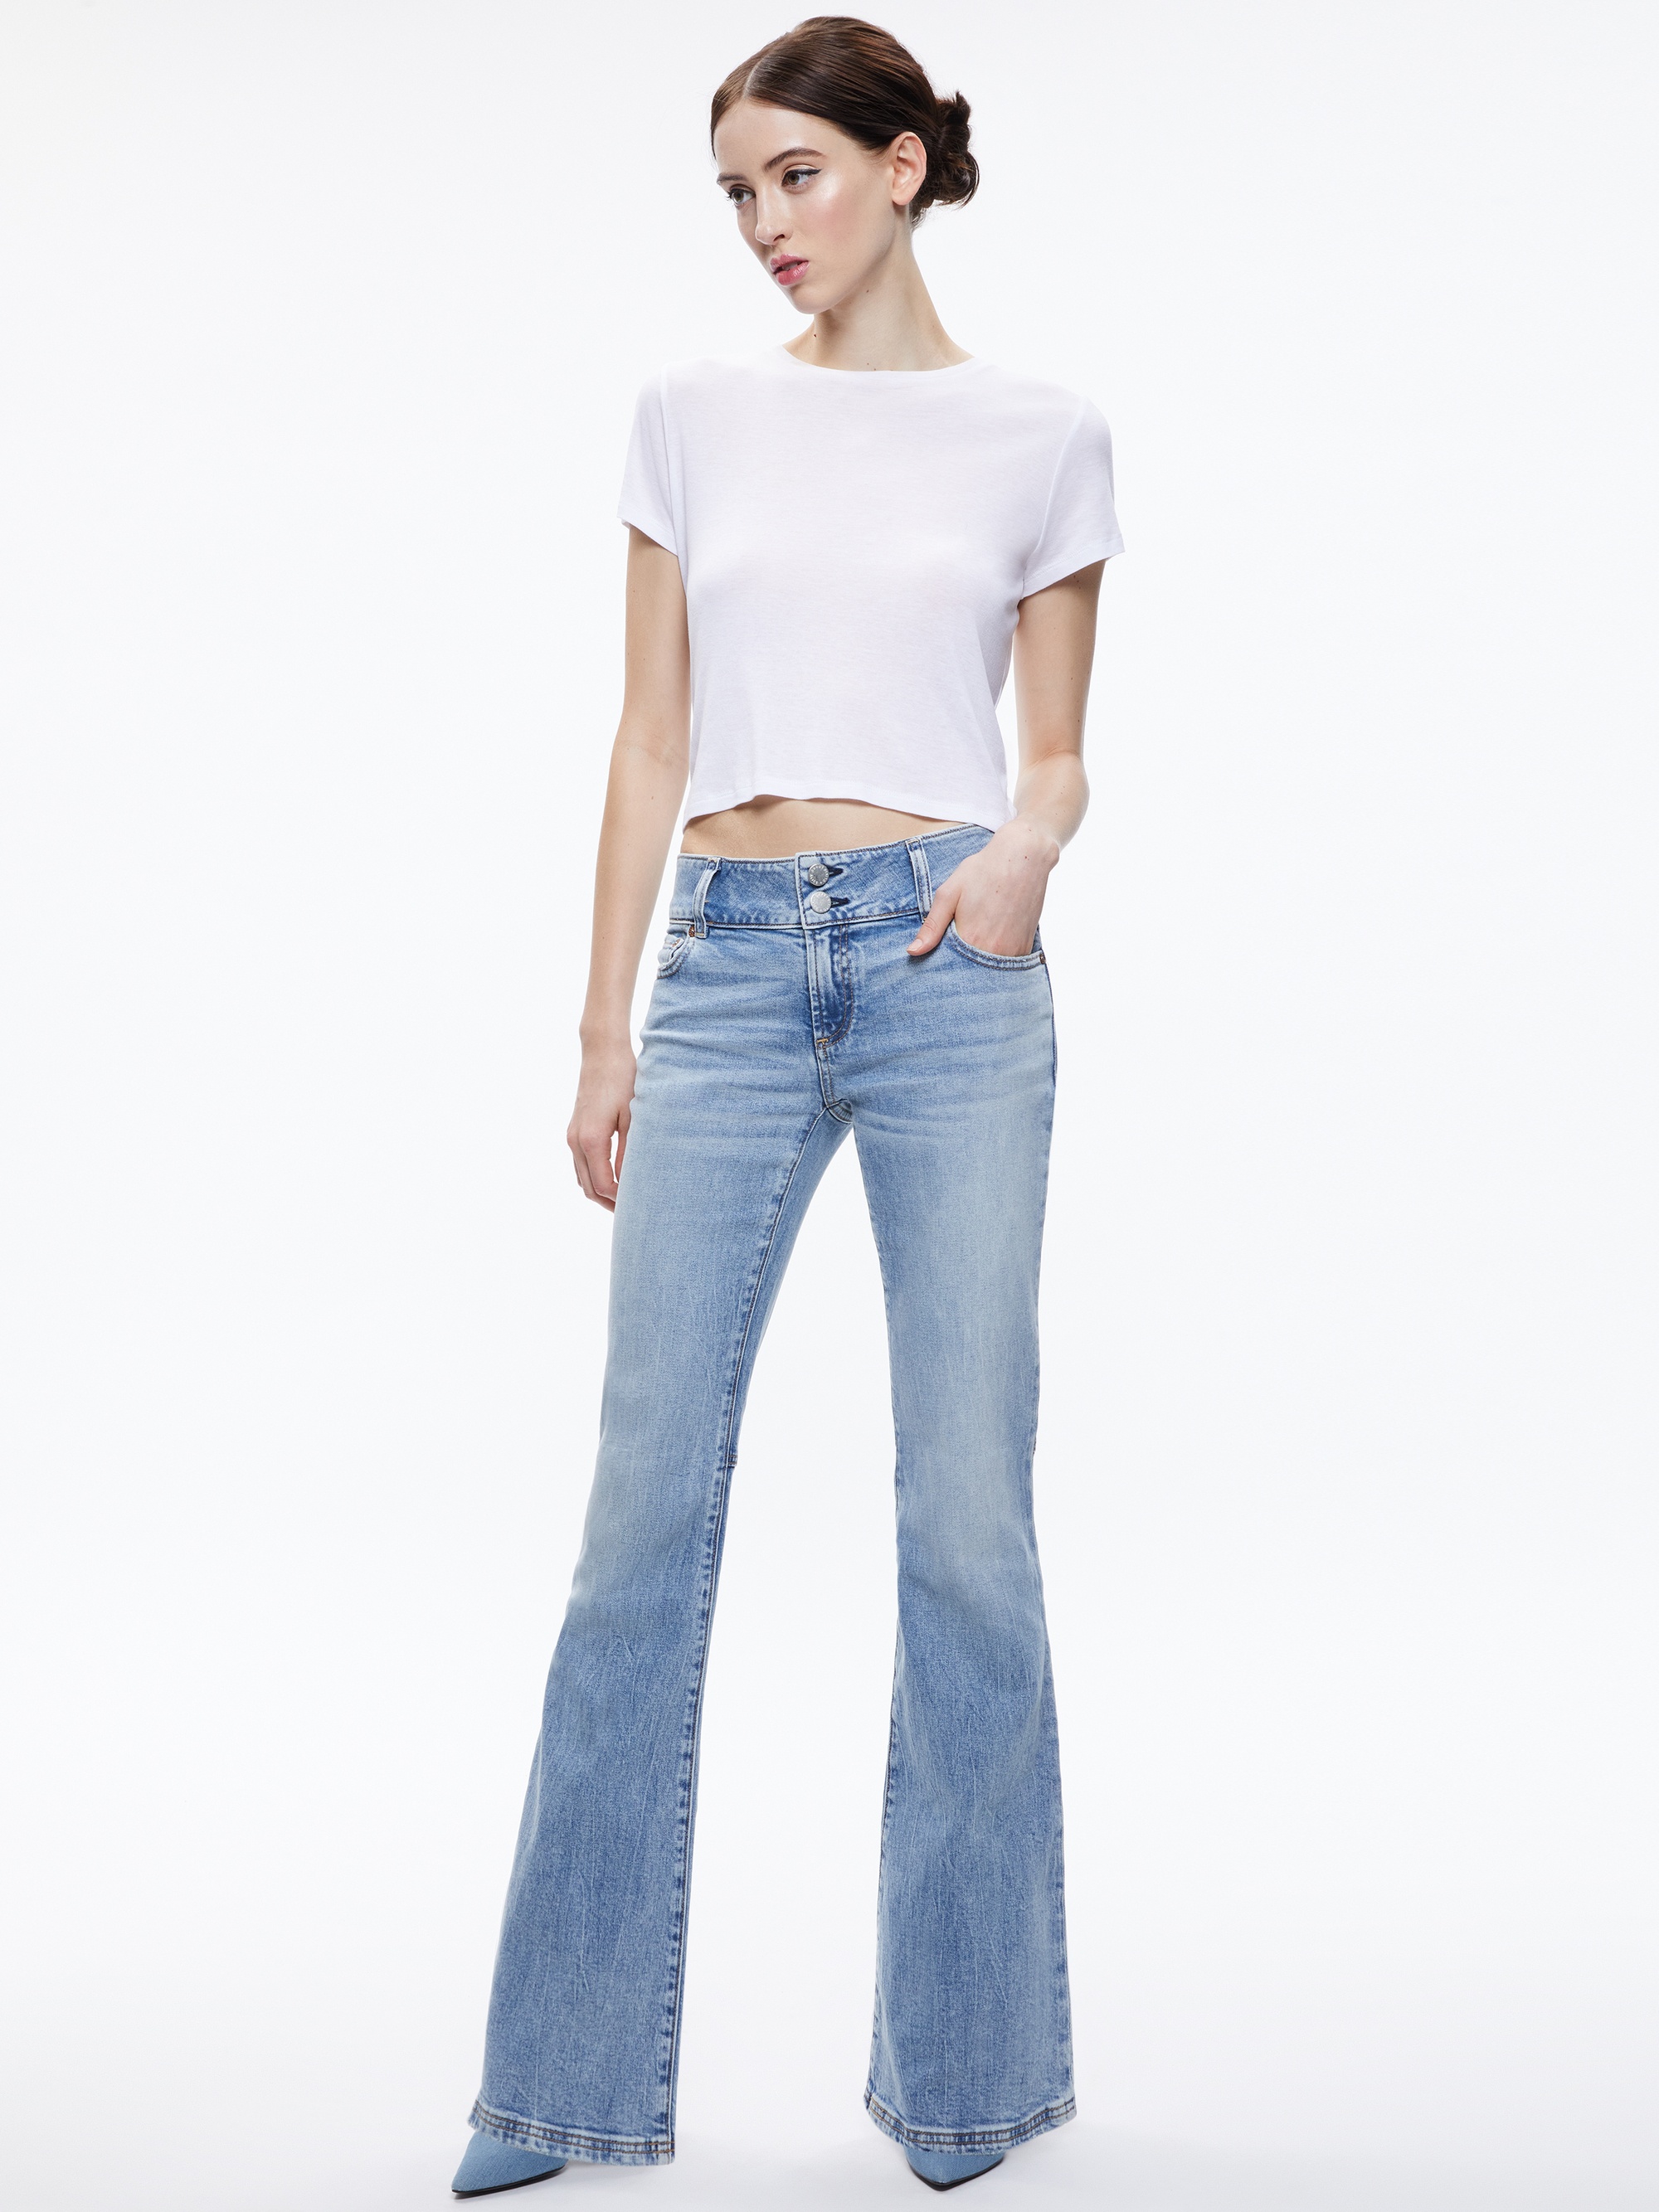 STACEY LOW RISE BELL BOTTOM JEAN - 6